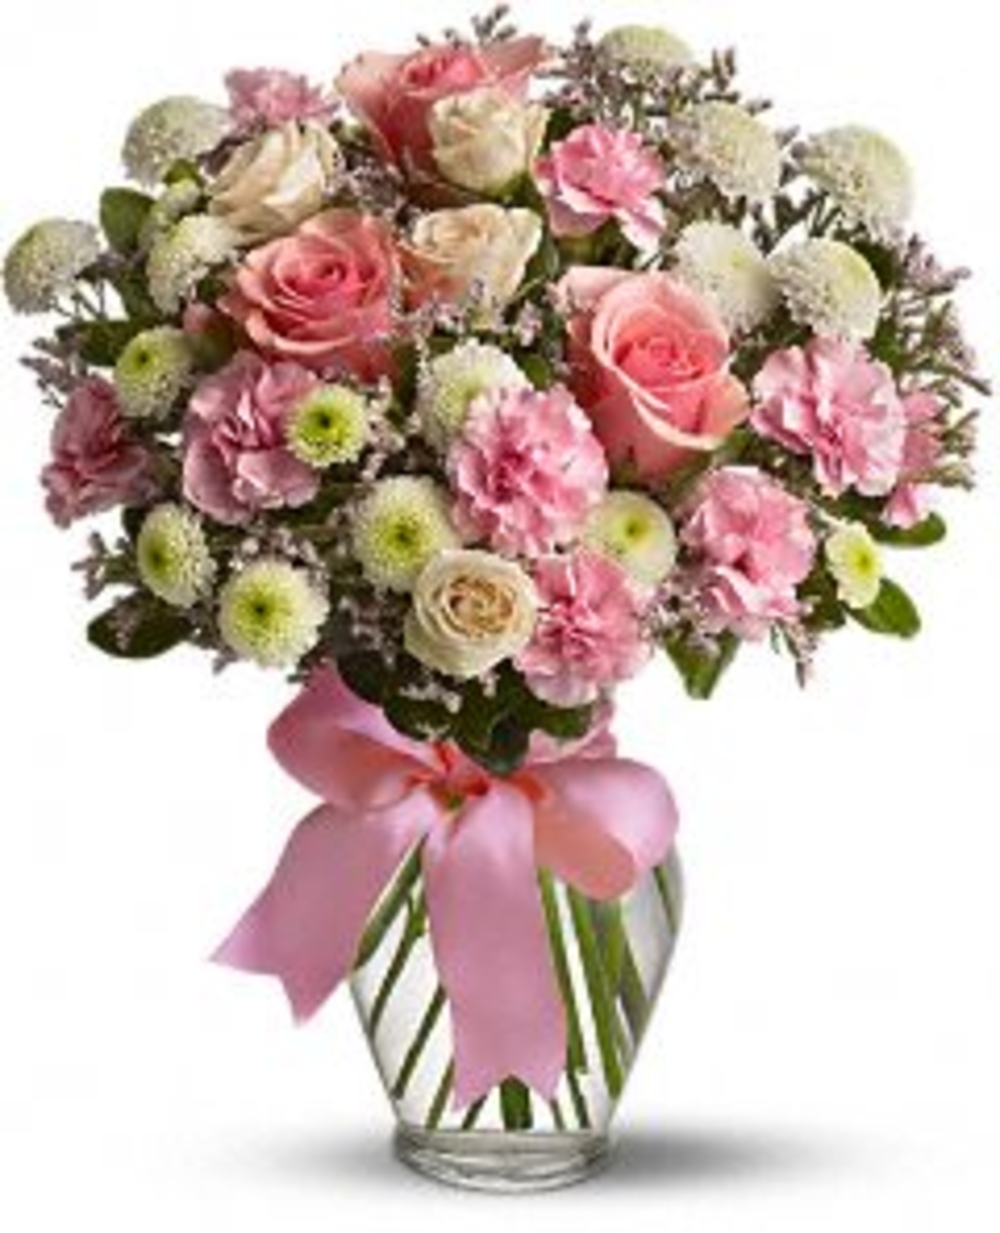 Vase with Mixed Pink & White Roses , Carnations & Crysanthimums